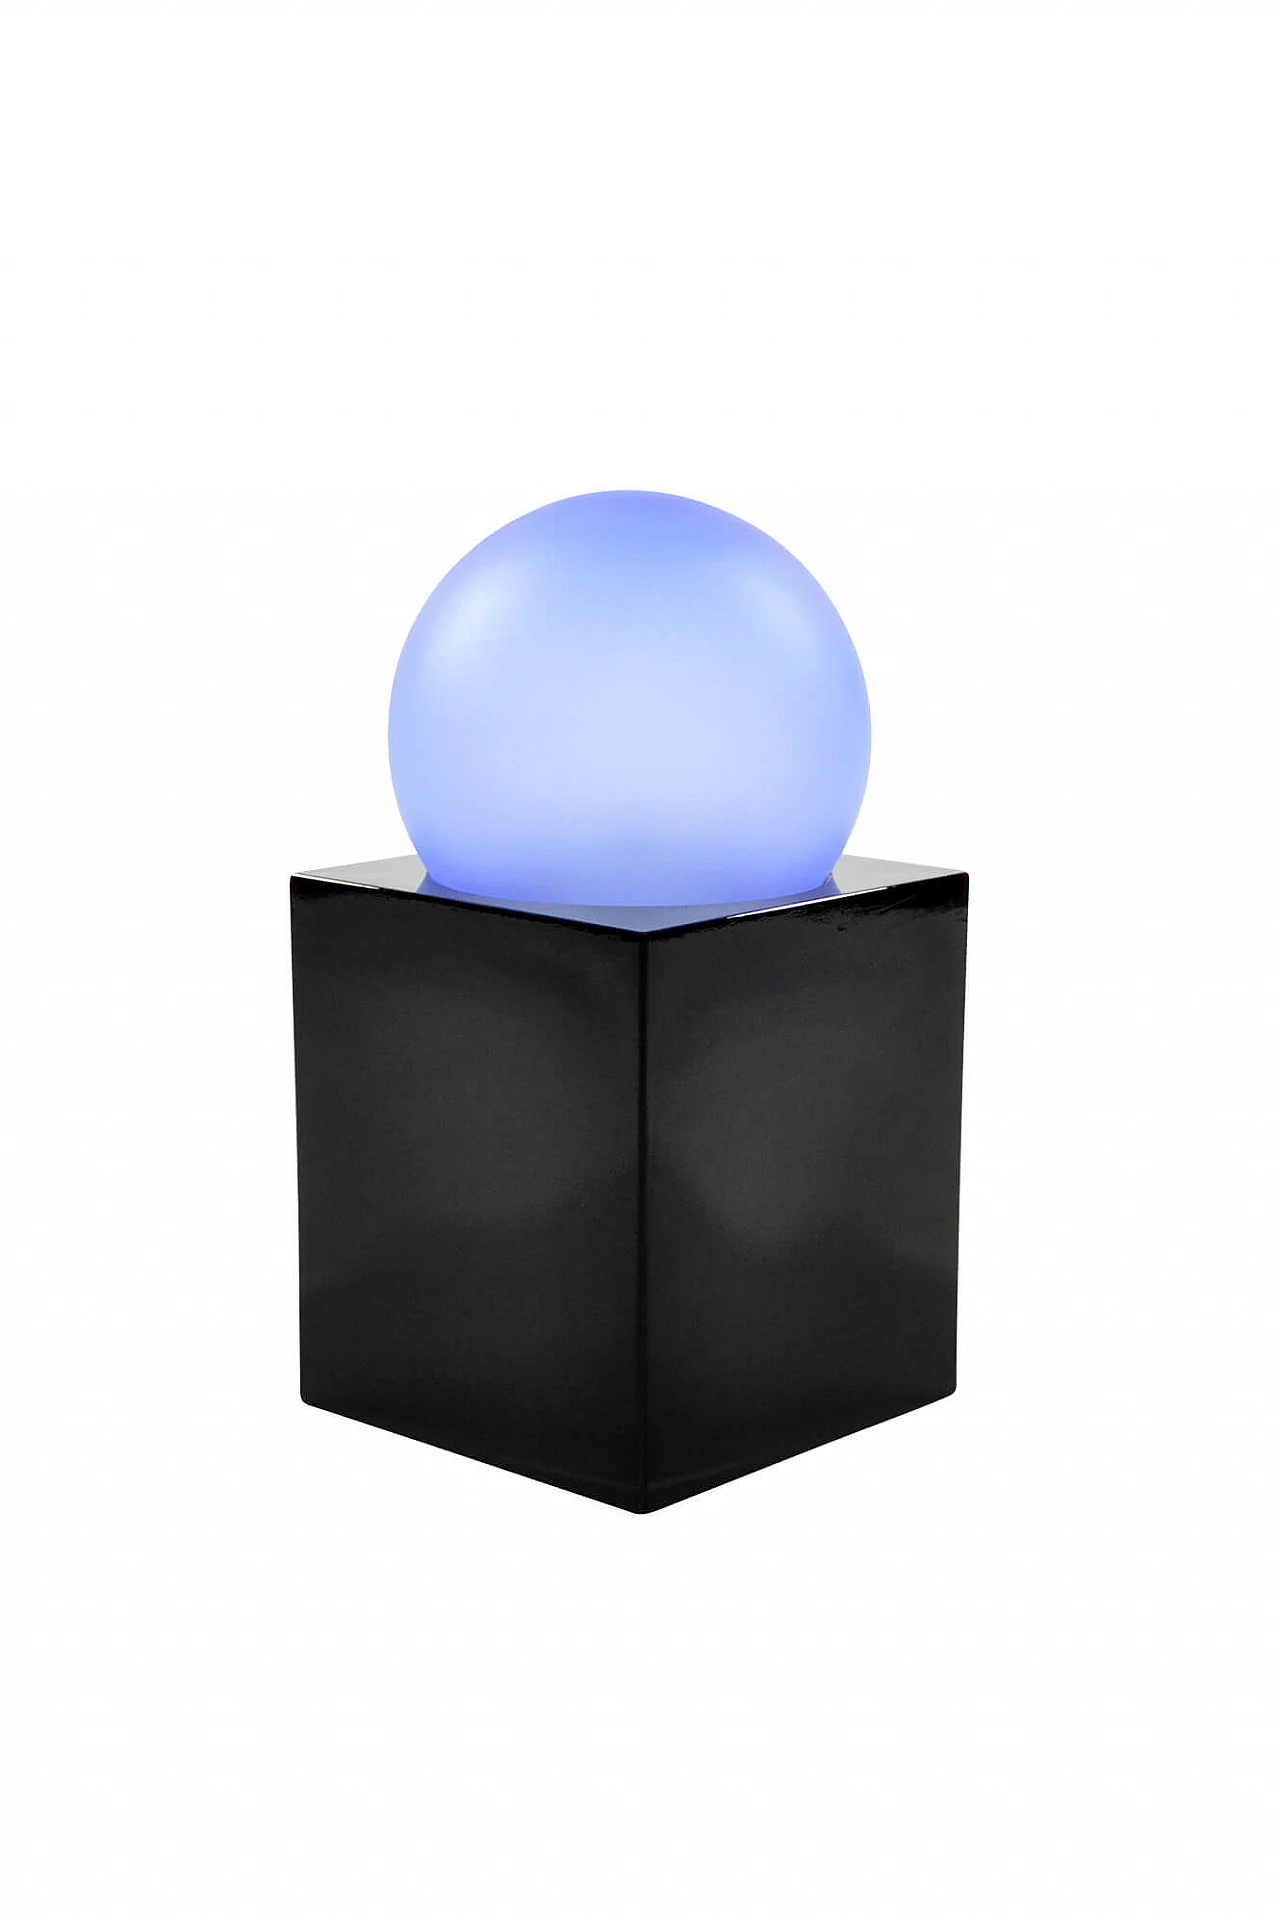 Alba table lamp by Ettore Sottsass for Enel, 2001 1258568